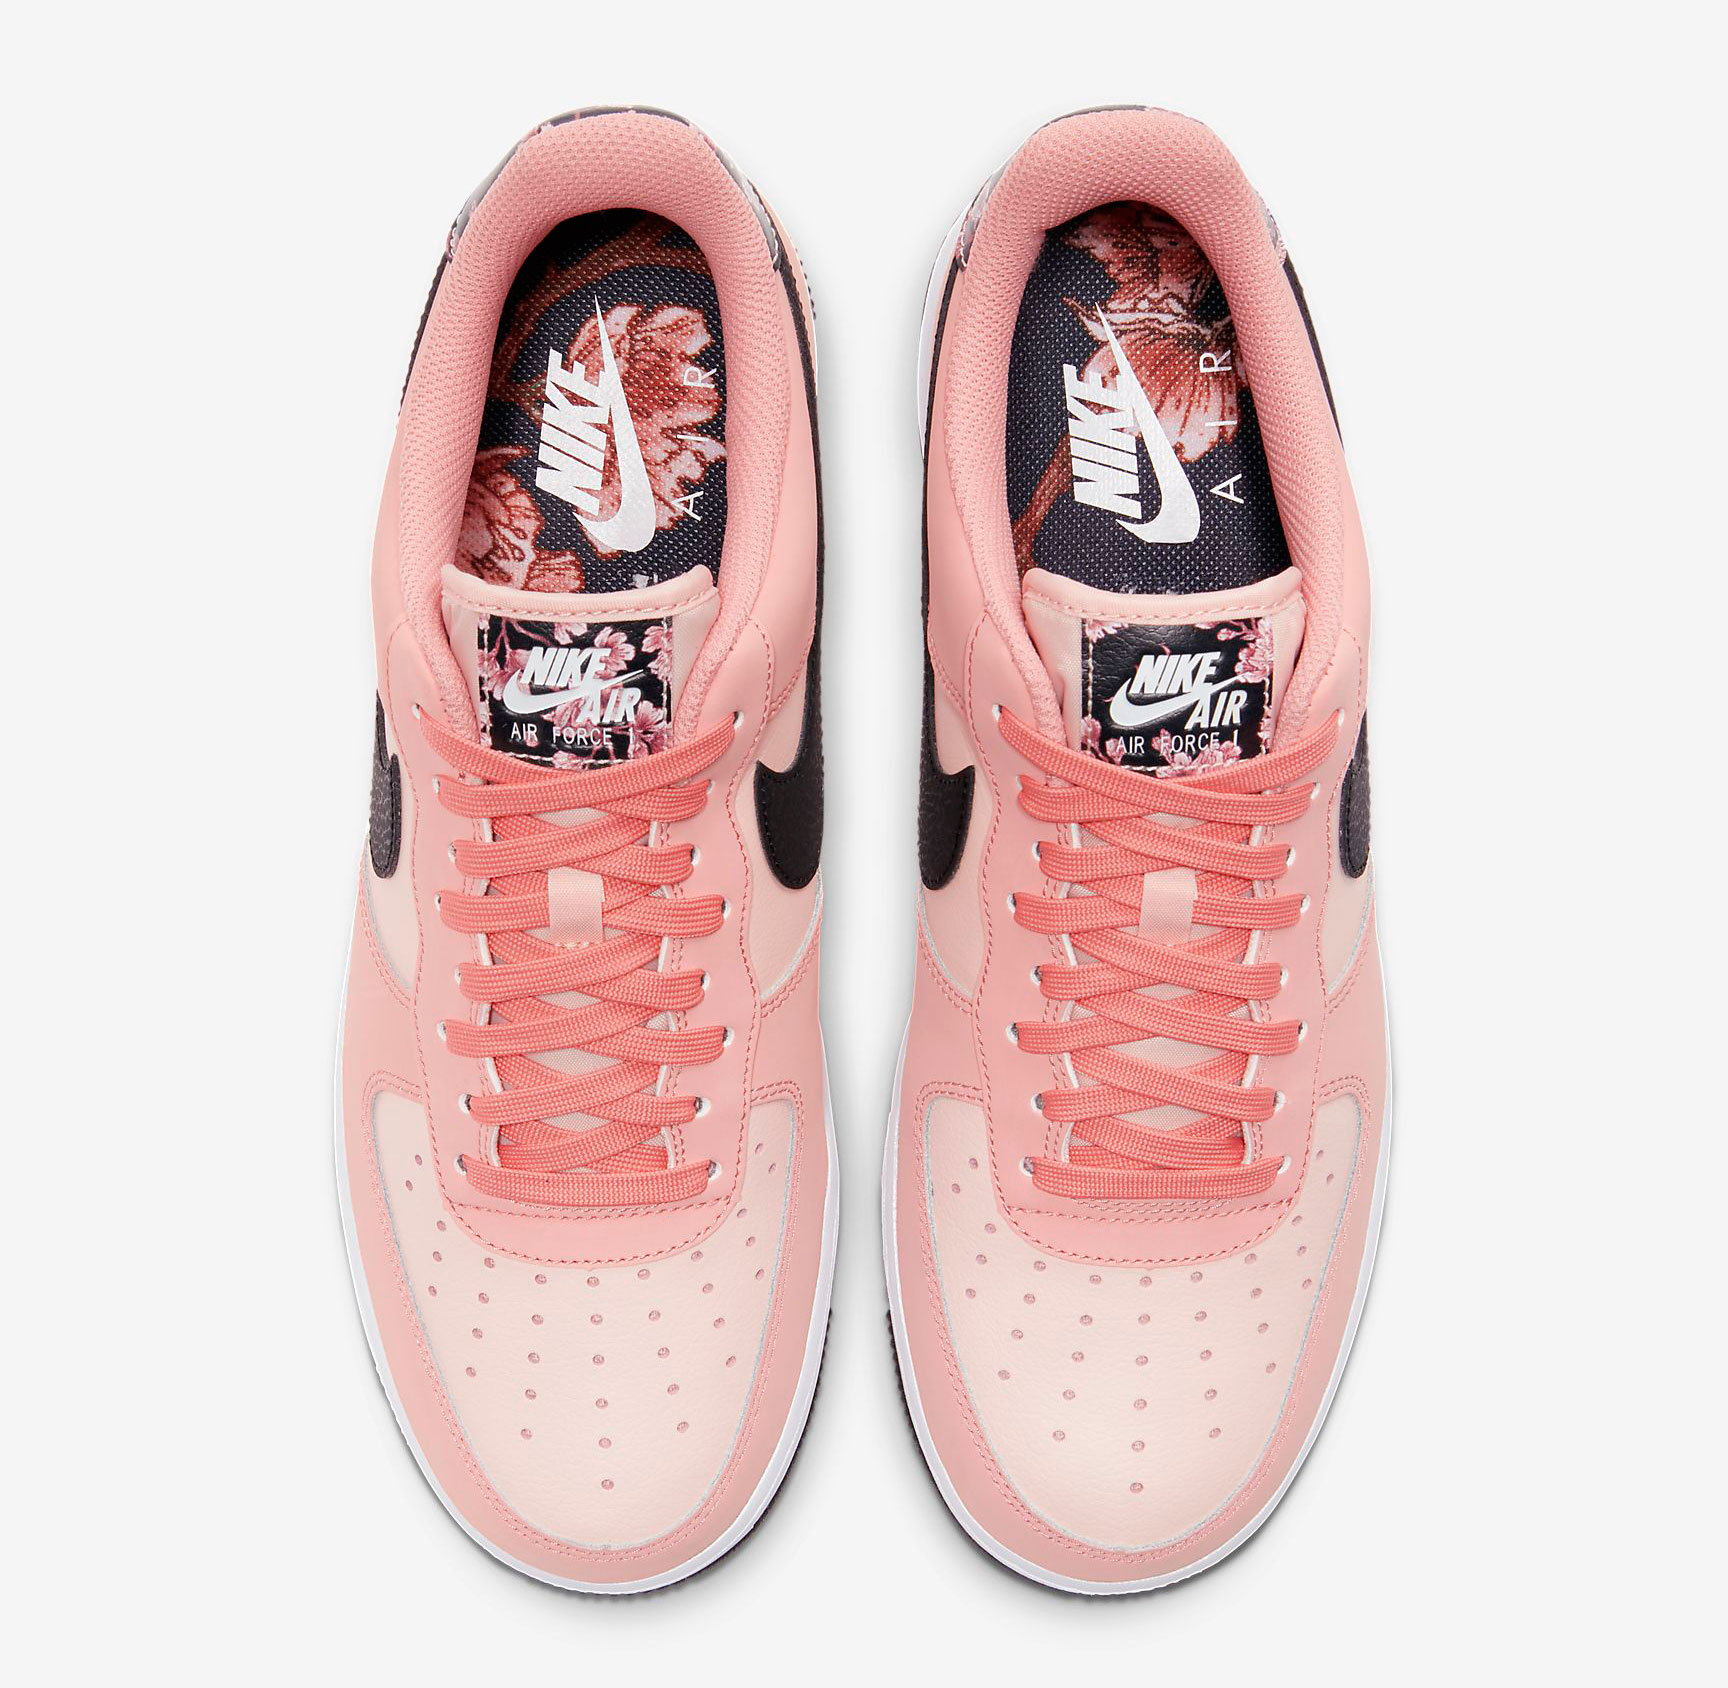 air force 1 japanese cherry blossom